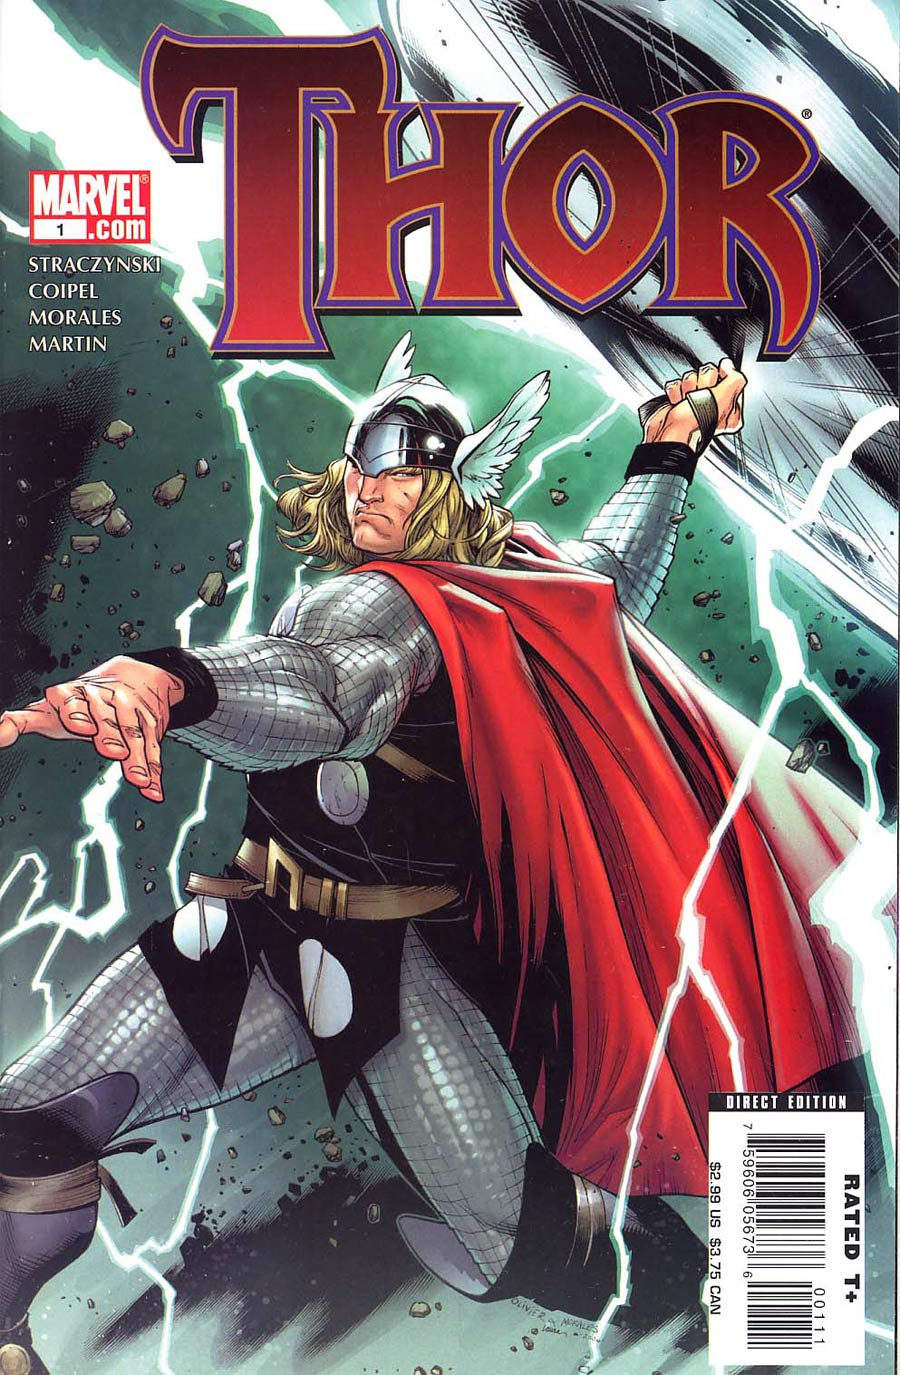 Thor Vol 3 #1 Cover A 1st Ptg Olivier Coipel Cover